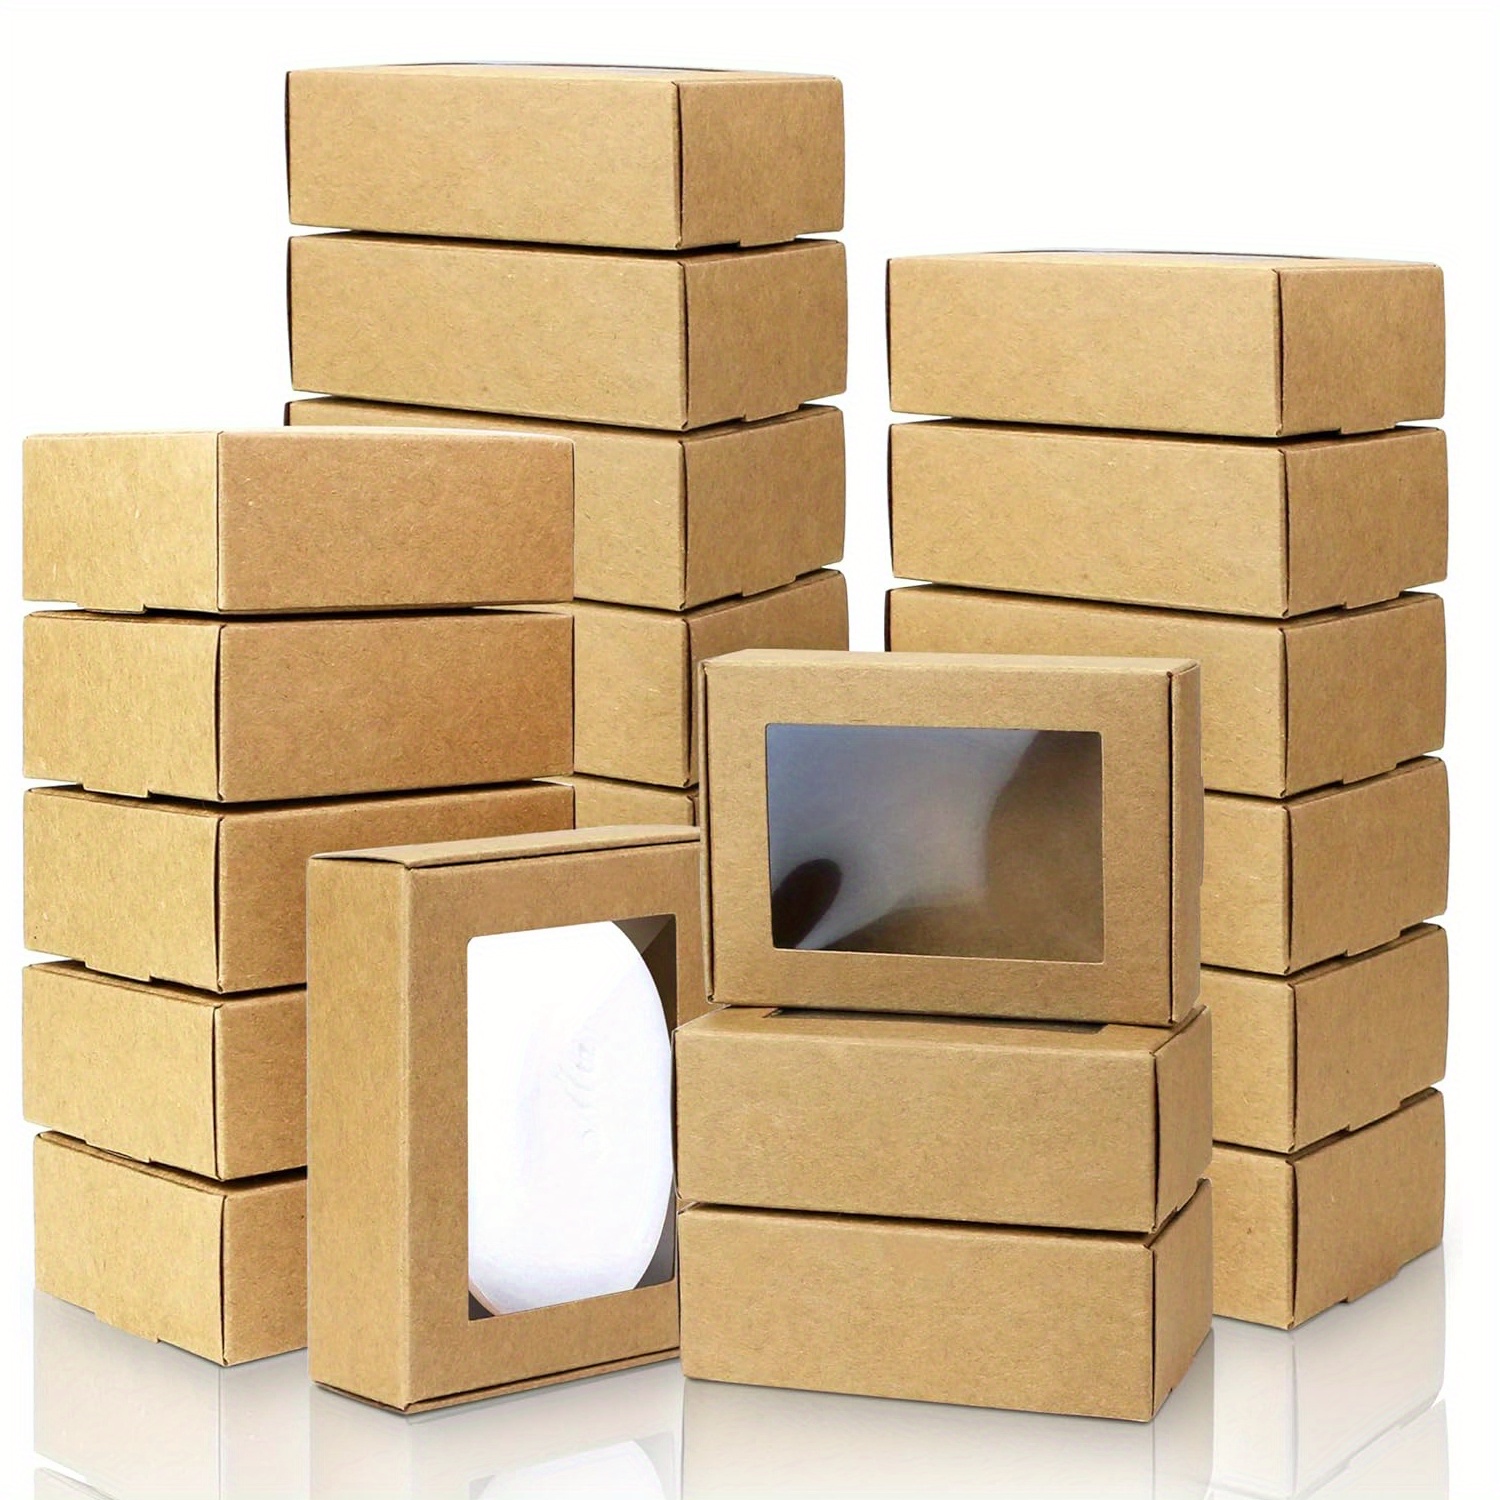 Golden State Art 9x6x4 Inches White Shipping Boxes 28 Pack, Corrugated  Cardboard Box for Small Business Mailing Shipping and Storage 